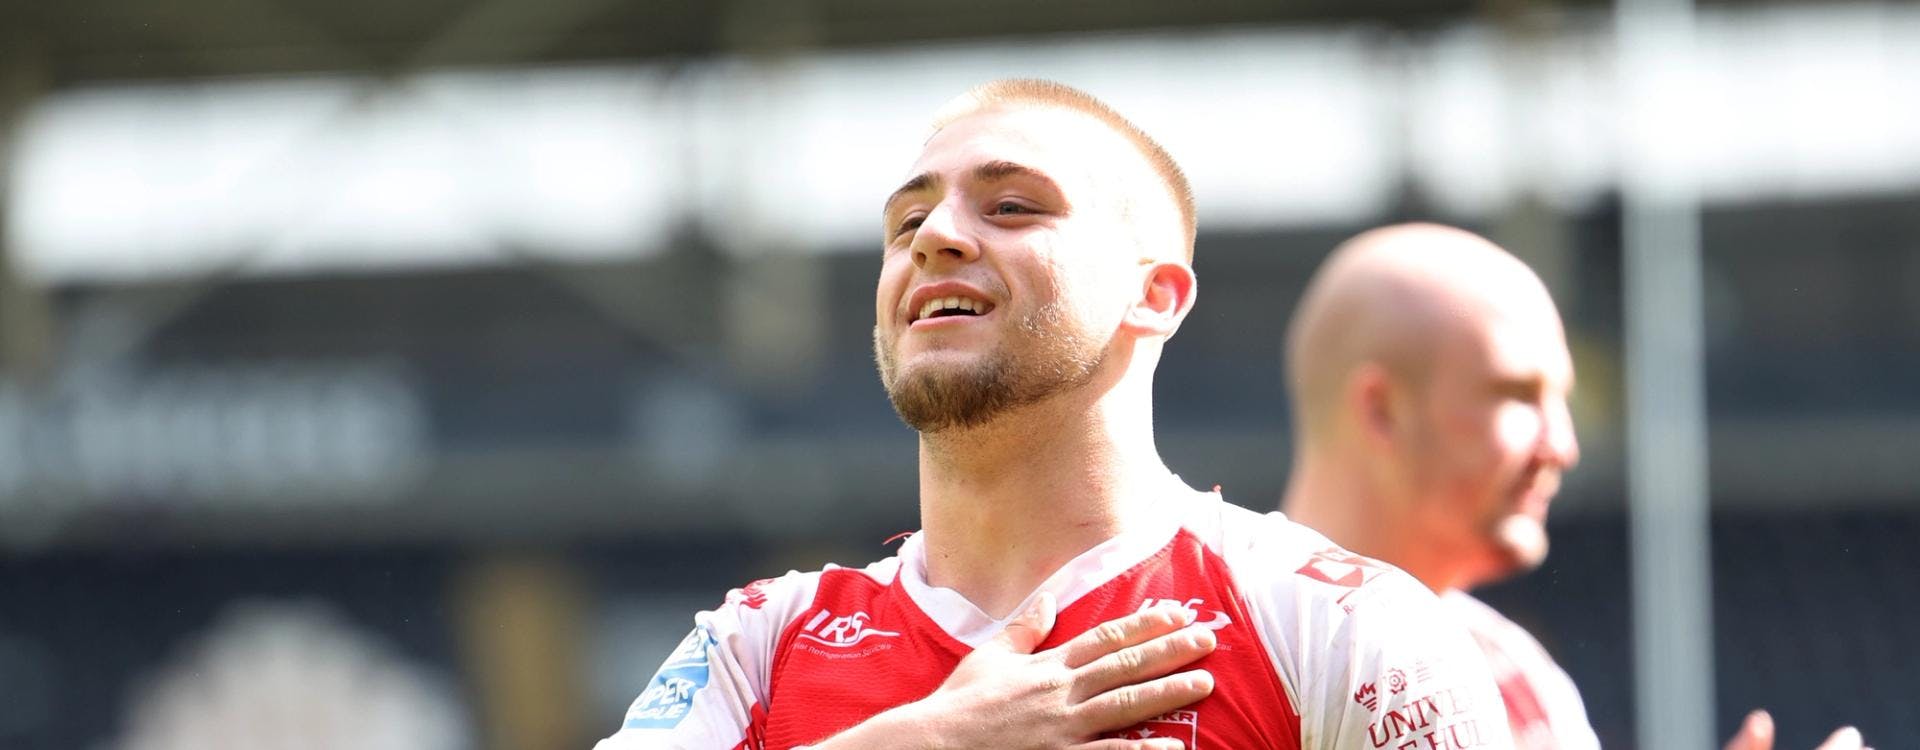 Hull KR confirm blockbuster opening two games